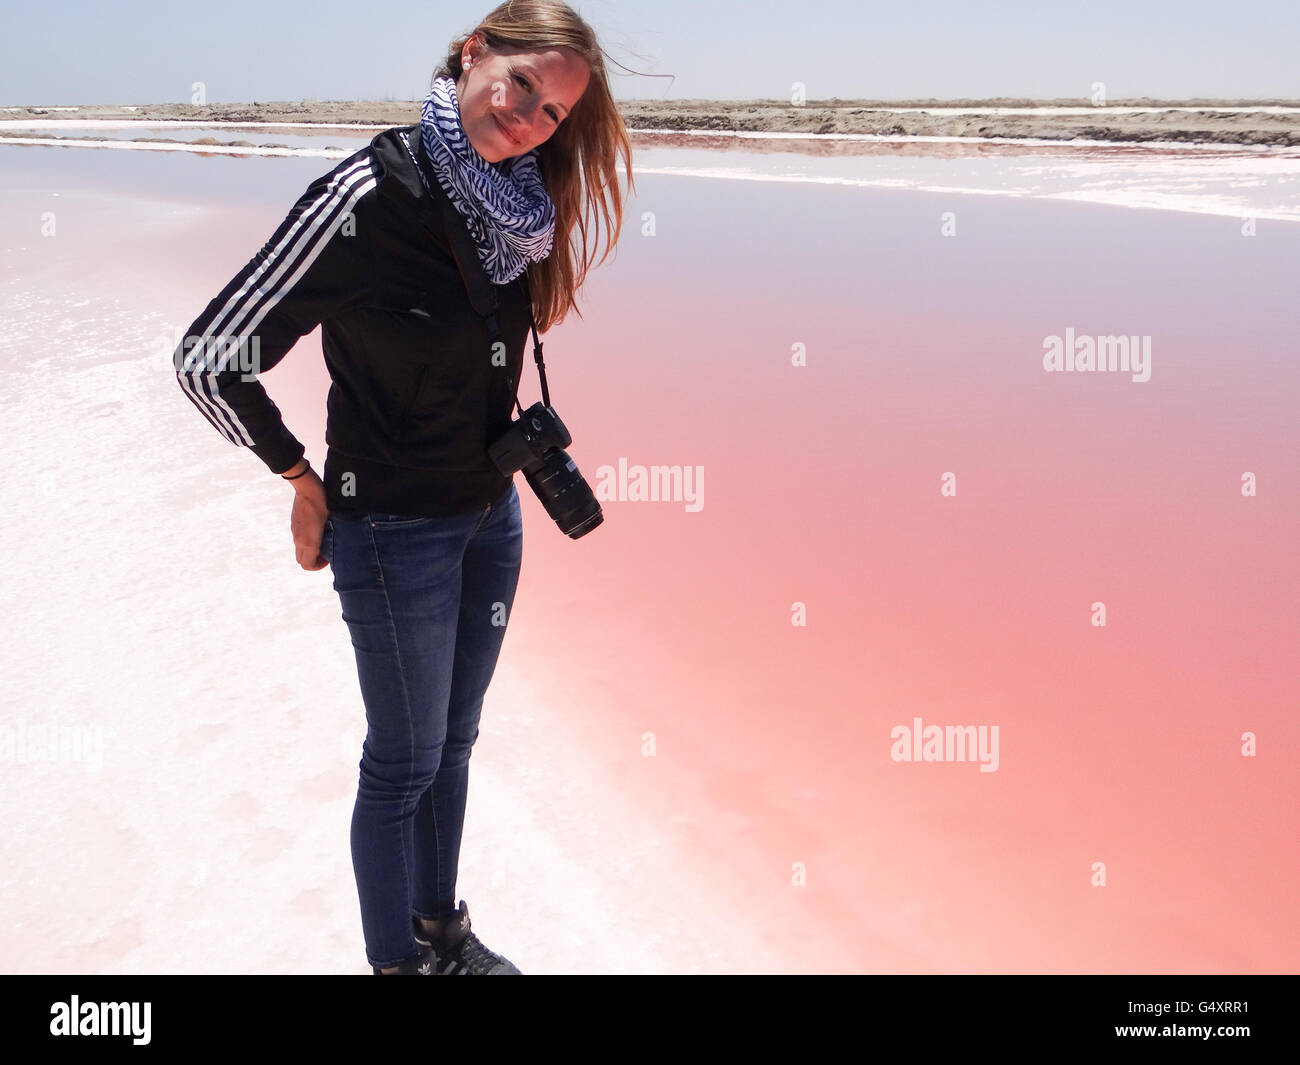 Namibia, Erongo, Walvis Bay, Dorob National Park, Woman in front of red saline water Stock Photo